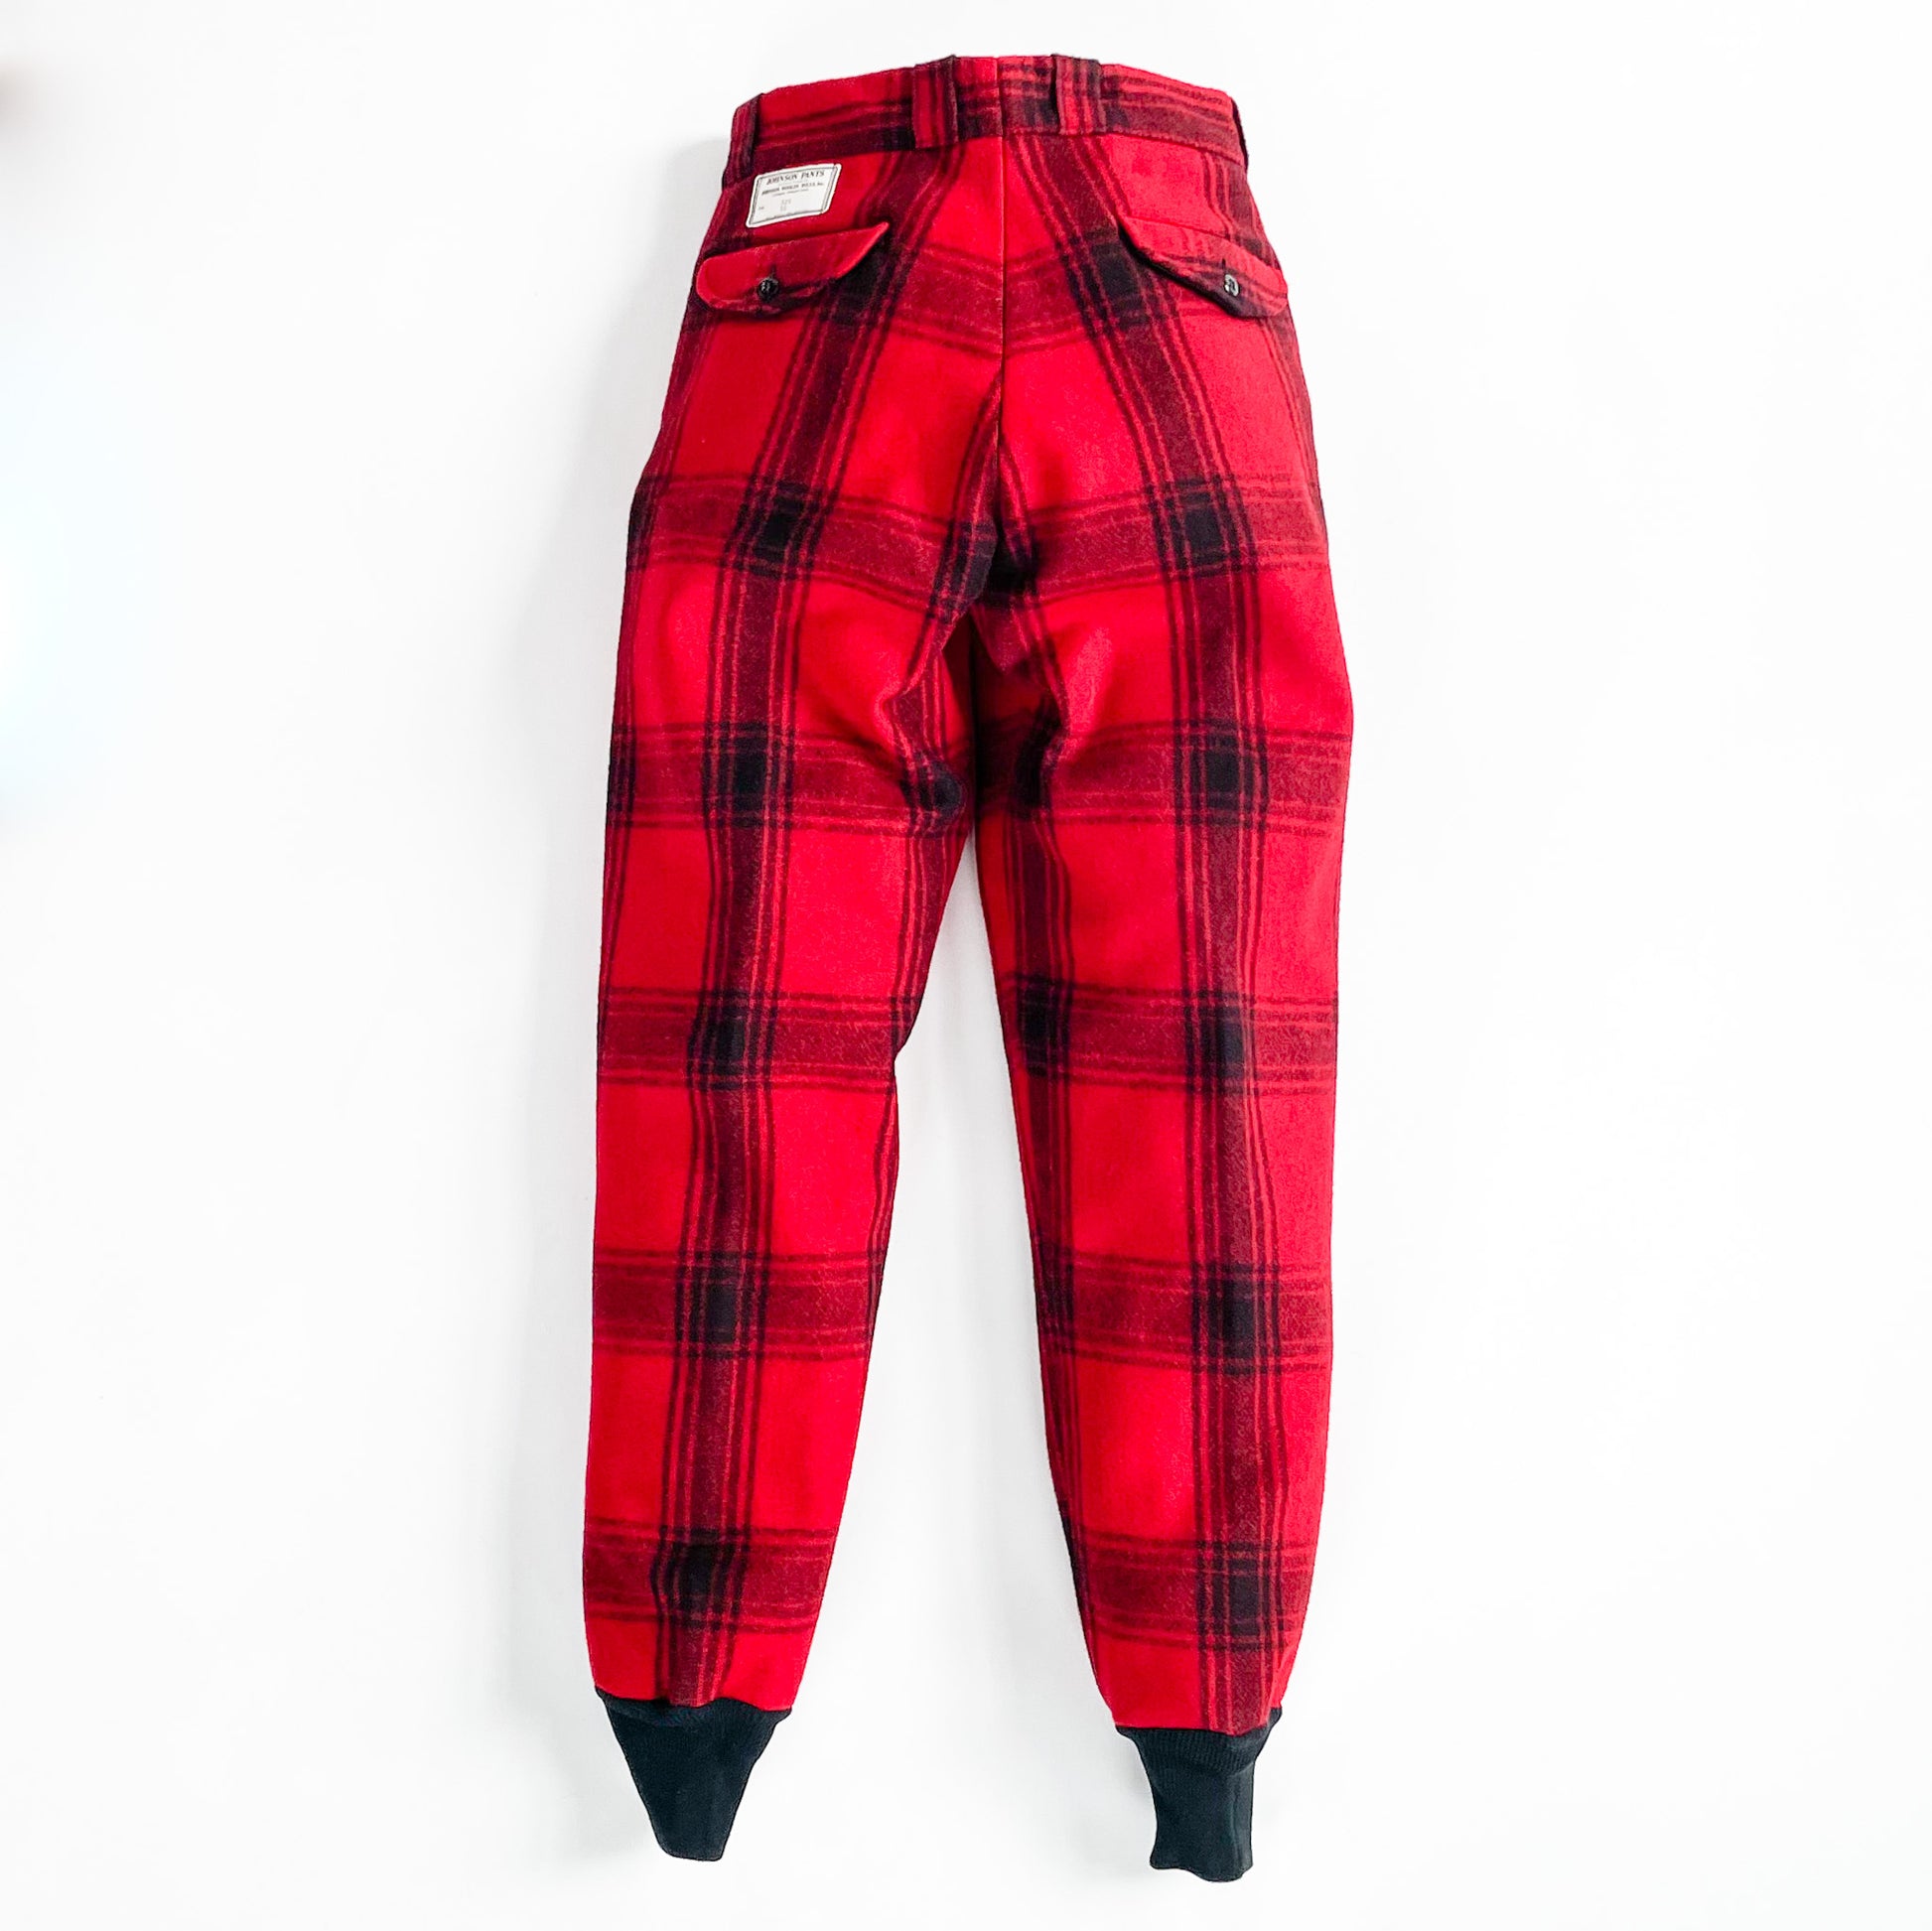 Cuff Pants  Bright Red & Black Muted Plaid front view both legs